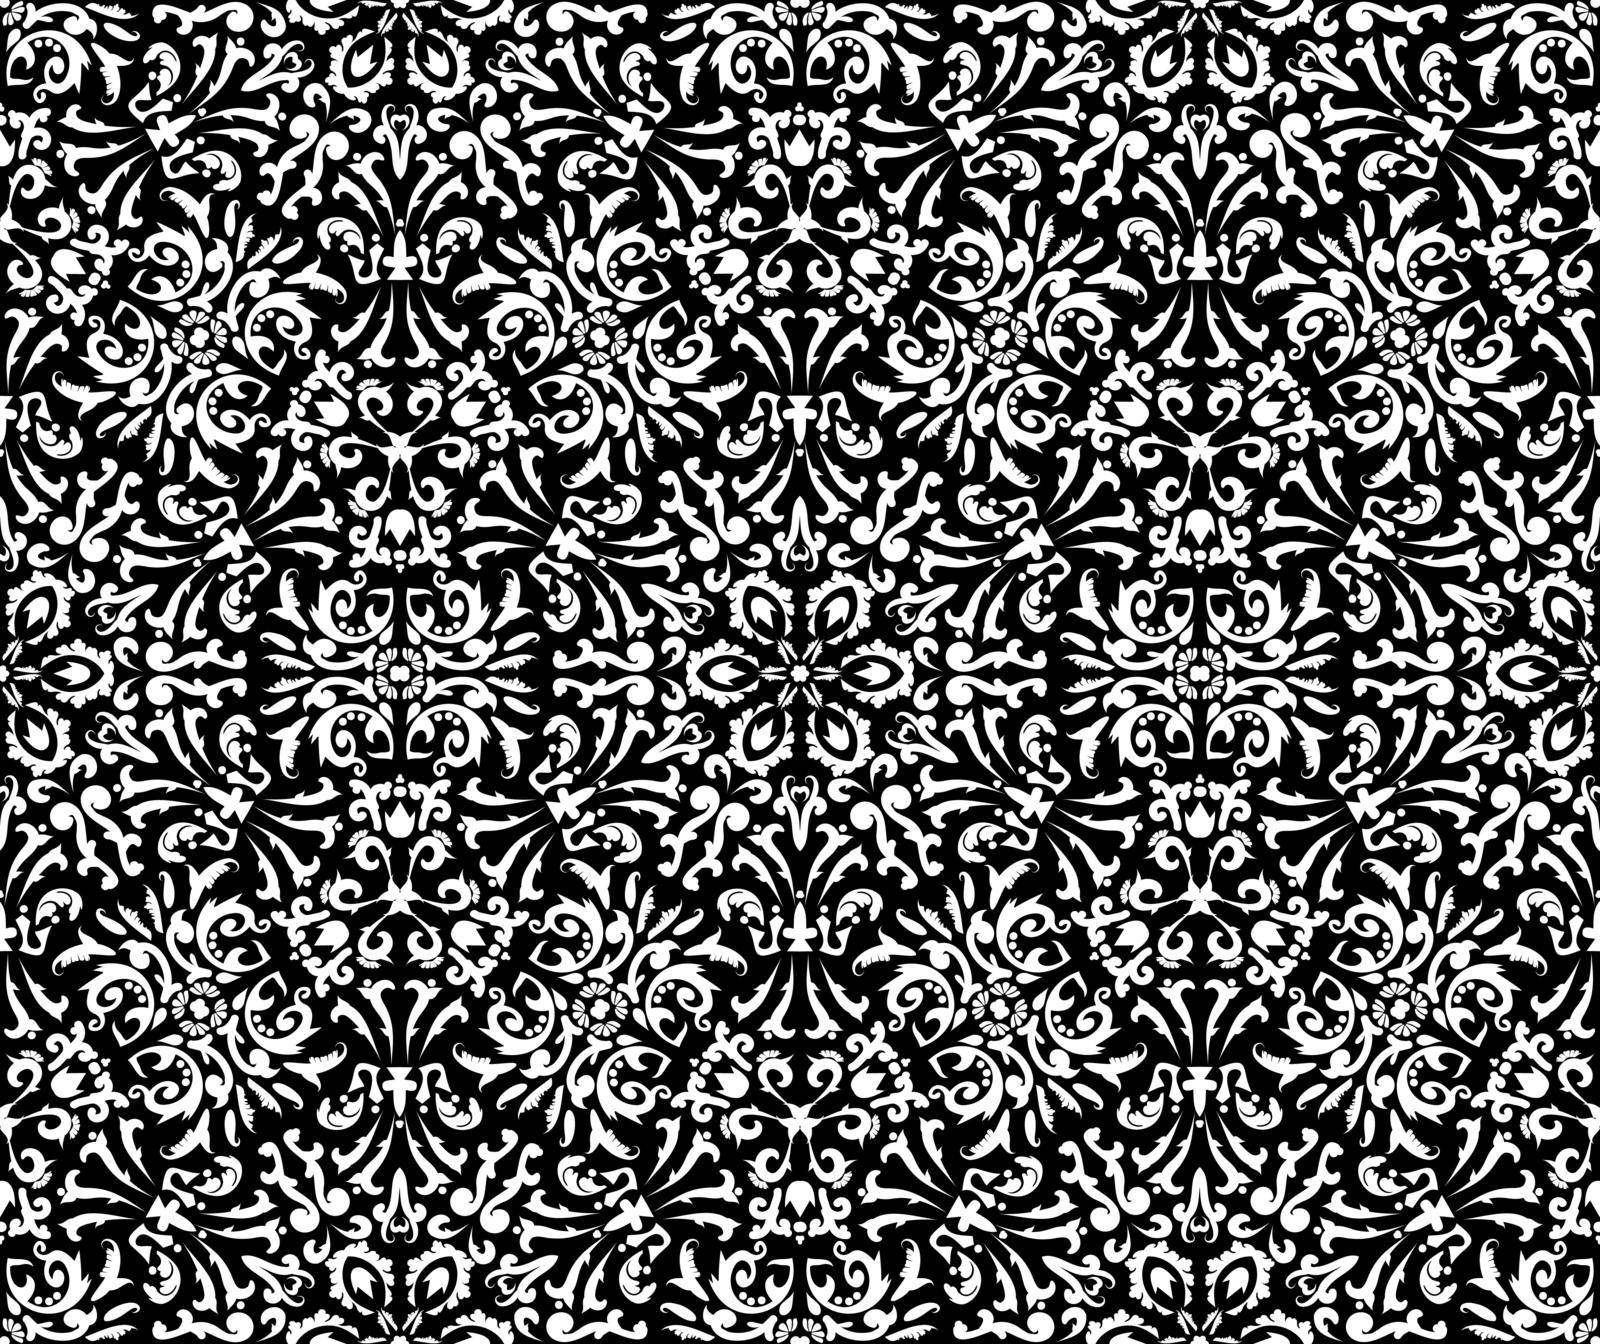 Luxurious Design with Filigree Pattern Seamless Vector Template.Black and White. Decorative texture. Mehndi patterns. For fabric, wallpaper, venetian pattern,textile, packaging.